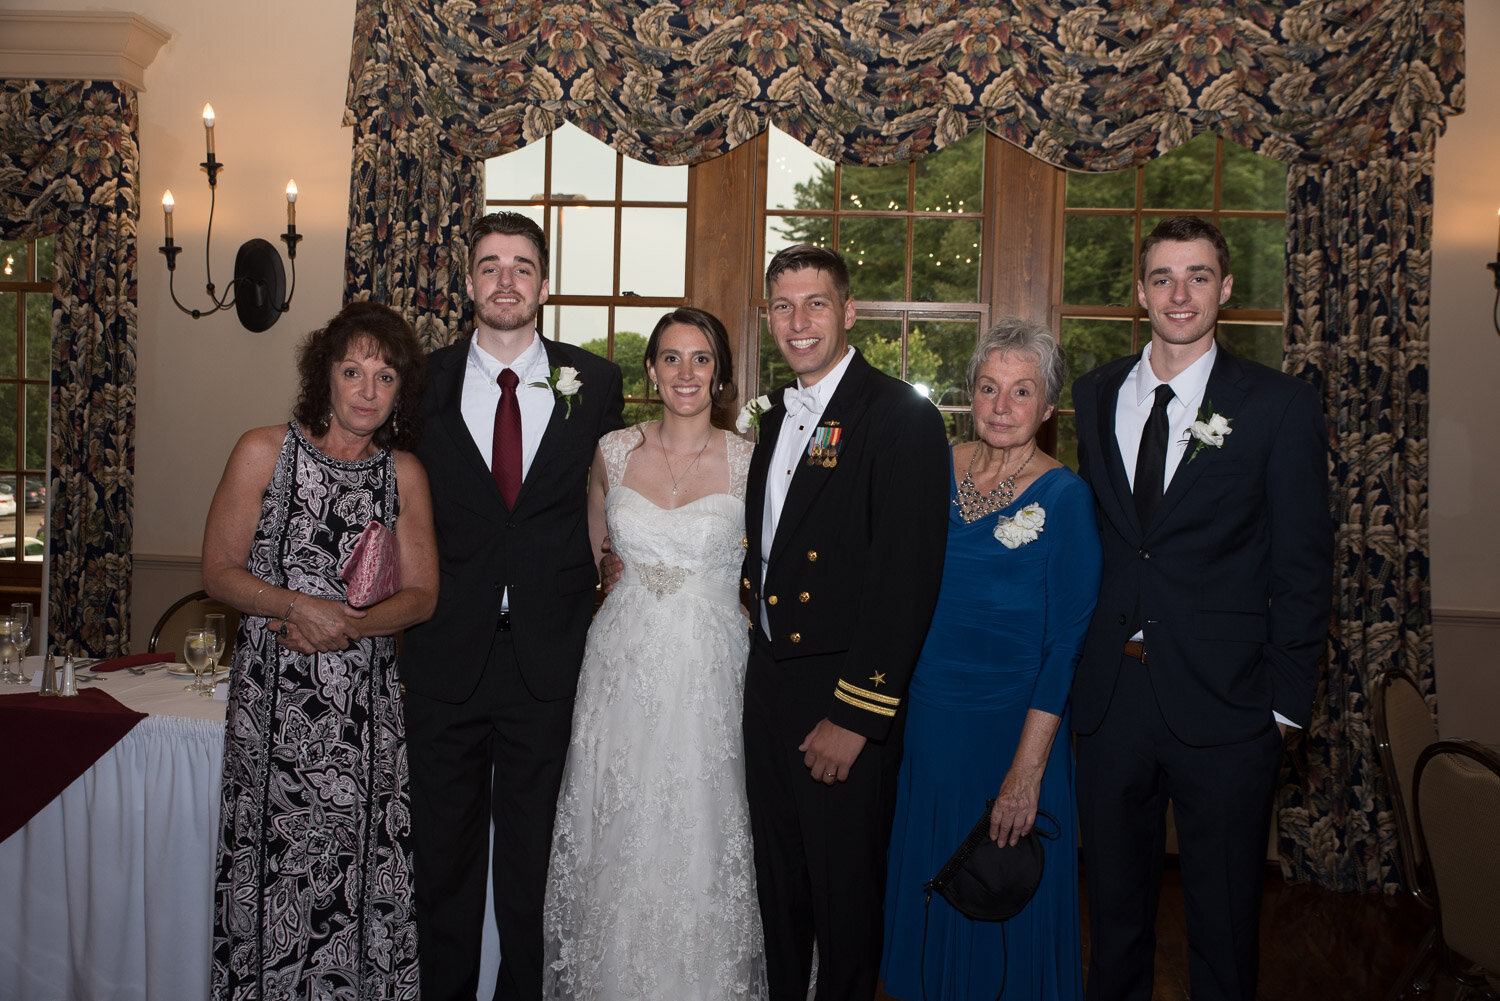 Wedding Reception at the Publick House Historic Inn